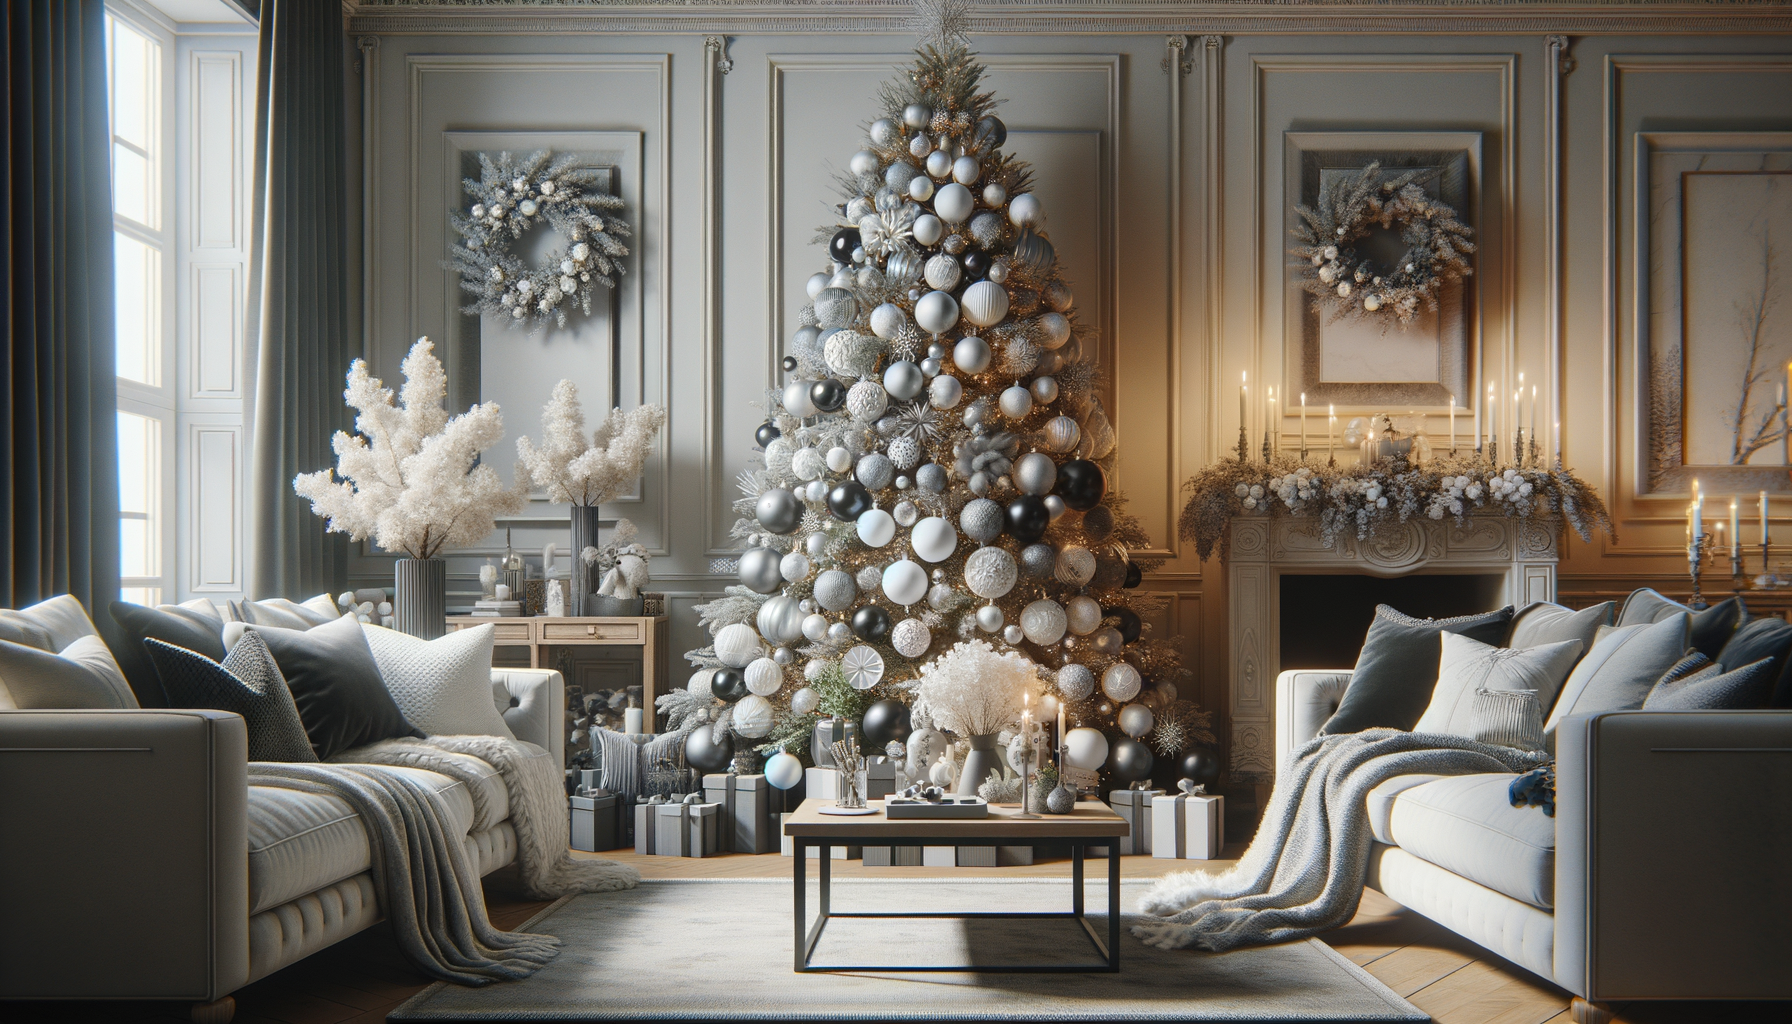 Modern living room with simple Christmas tree that has white, black, and silver ornaments.